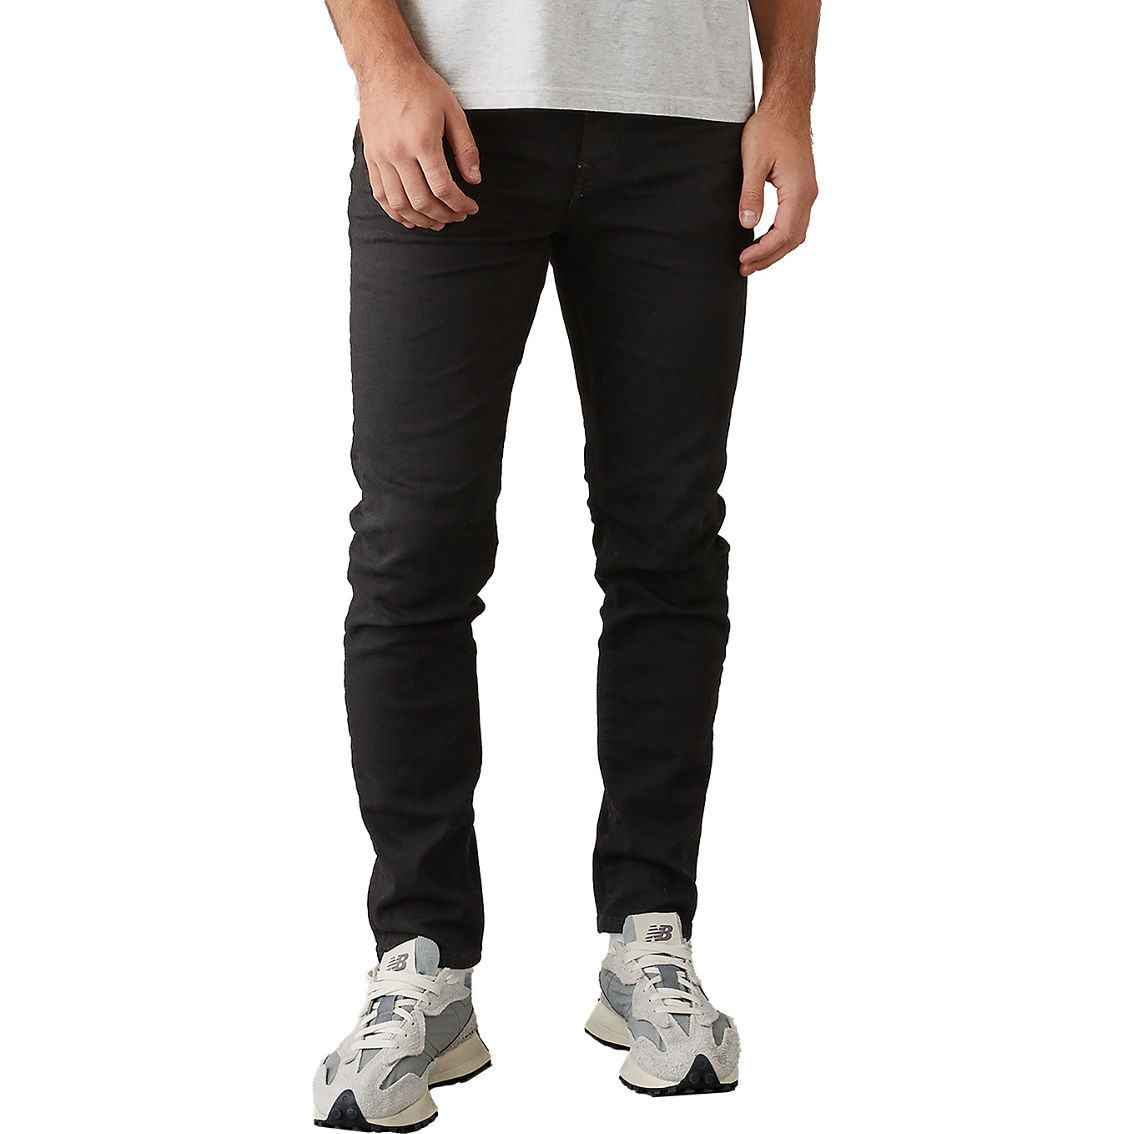 American Eagle Ae Airflex+ Athletic Fit Jeans | Jeans | Clothing ...